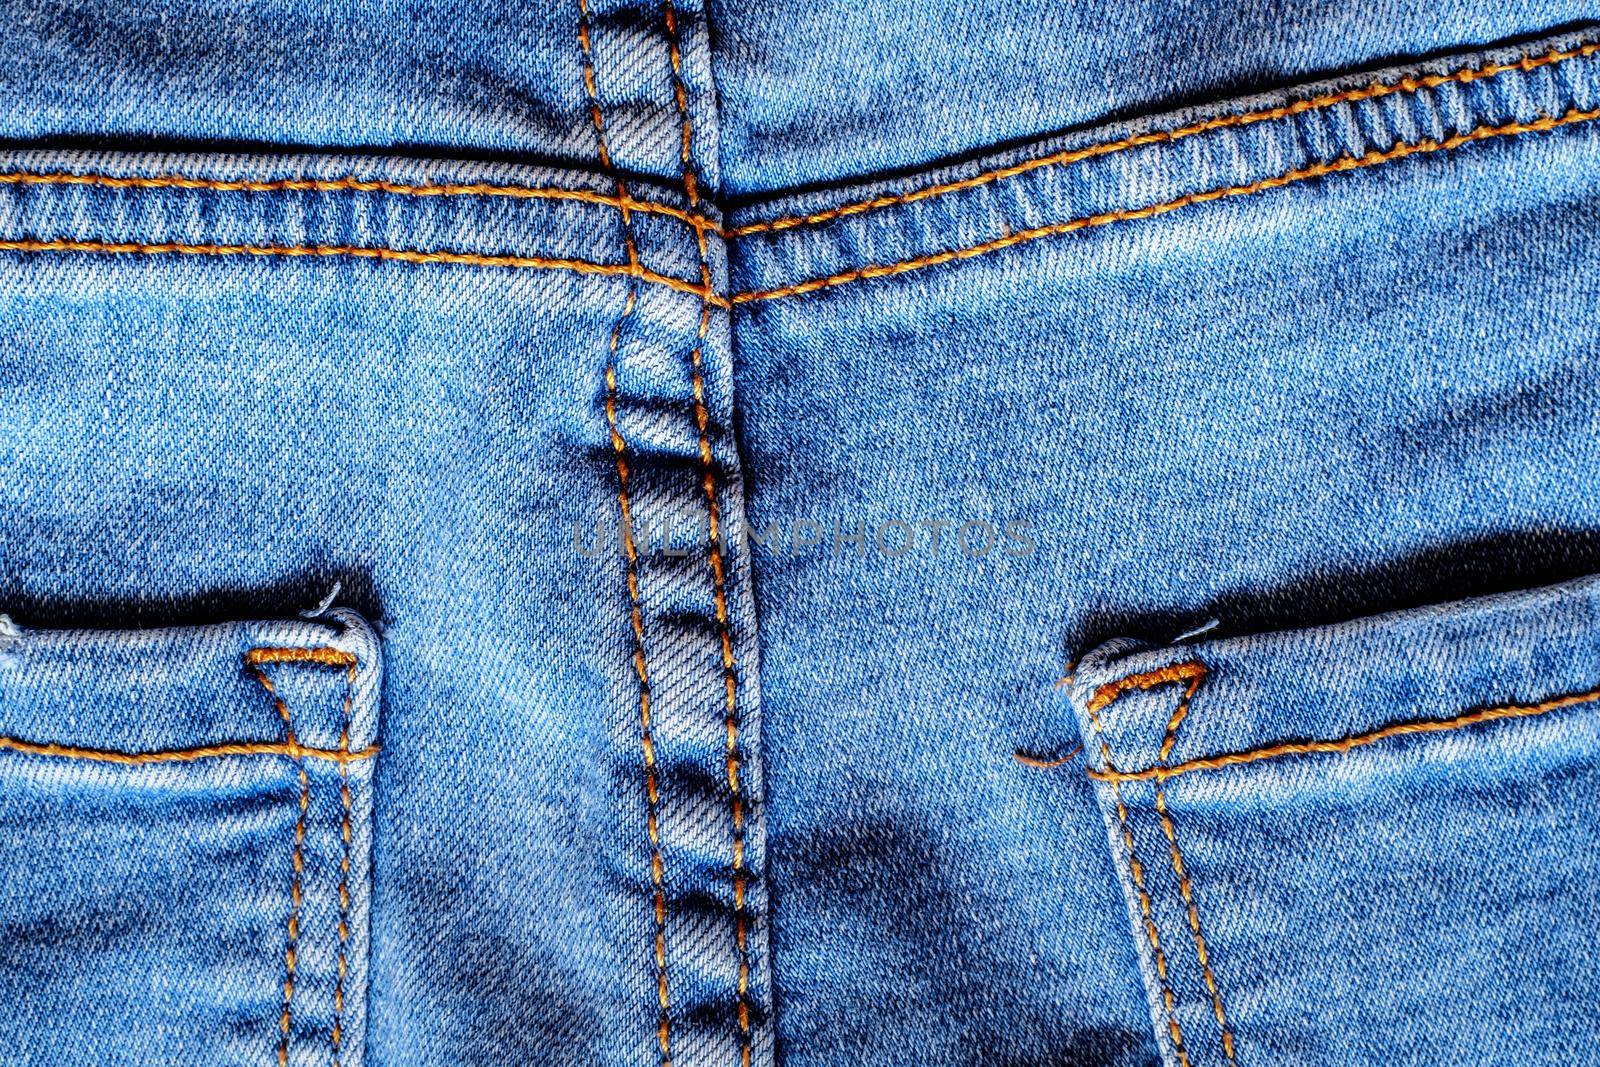 Details from jeans pants with seams and pockets by Roberto